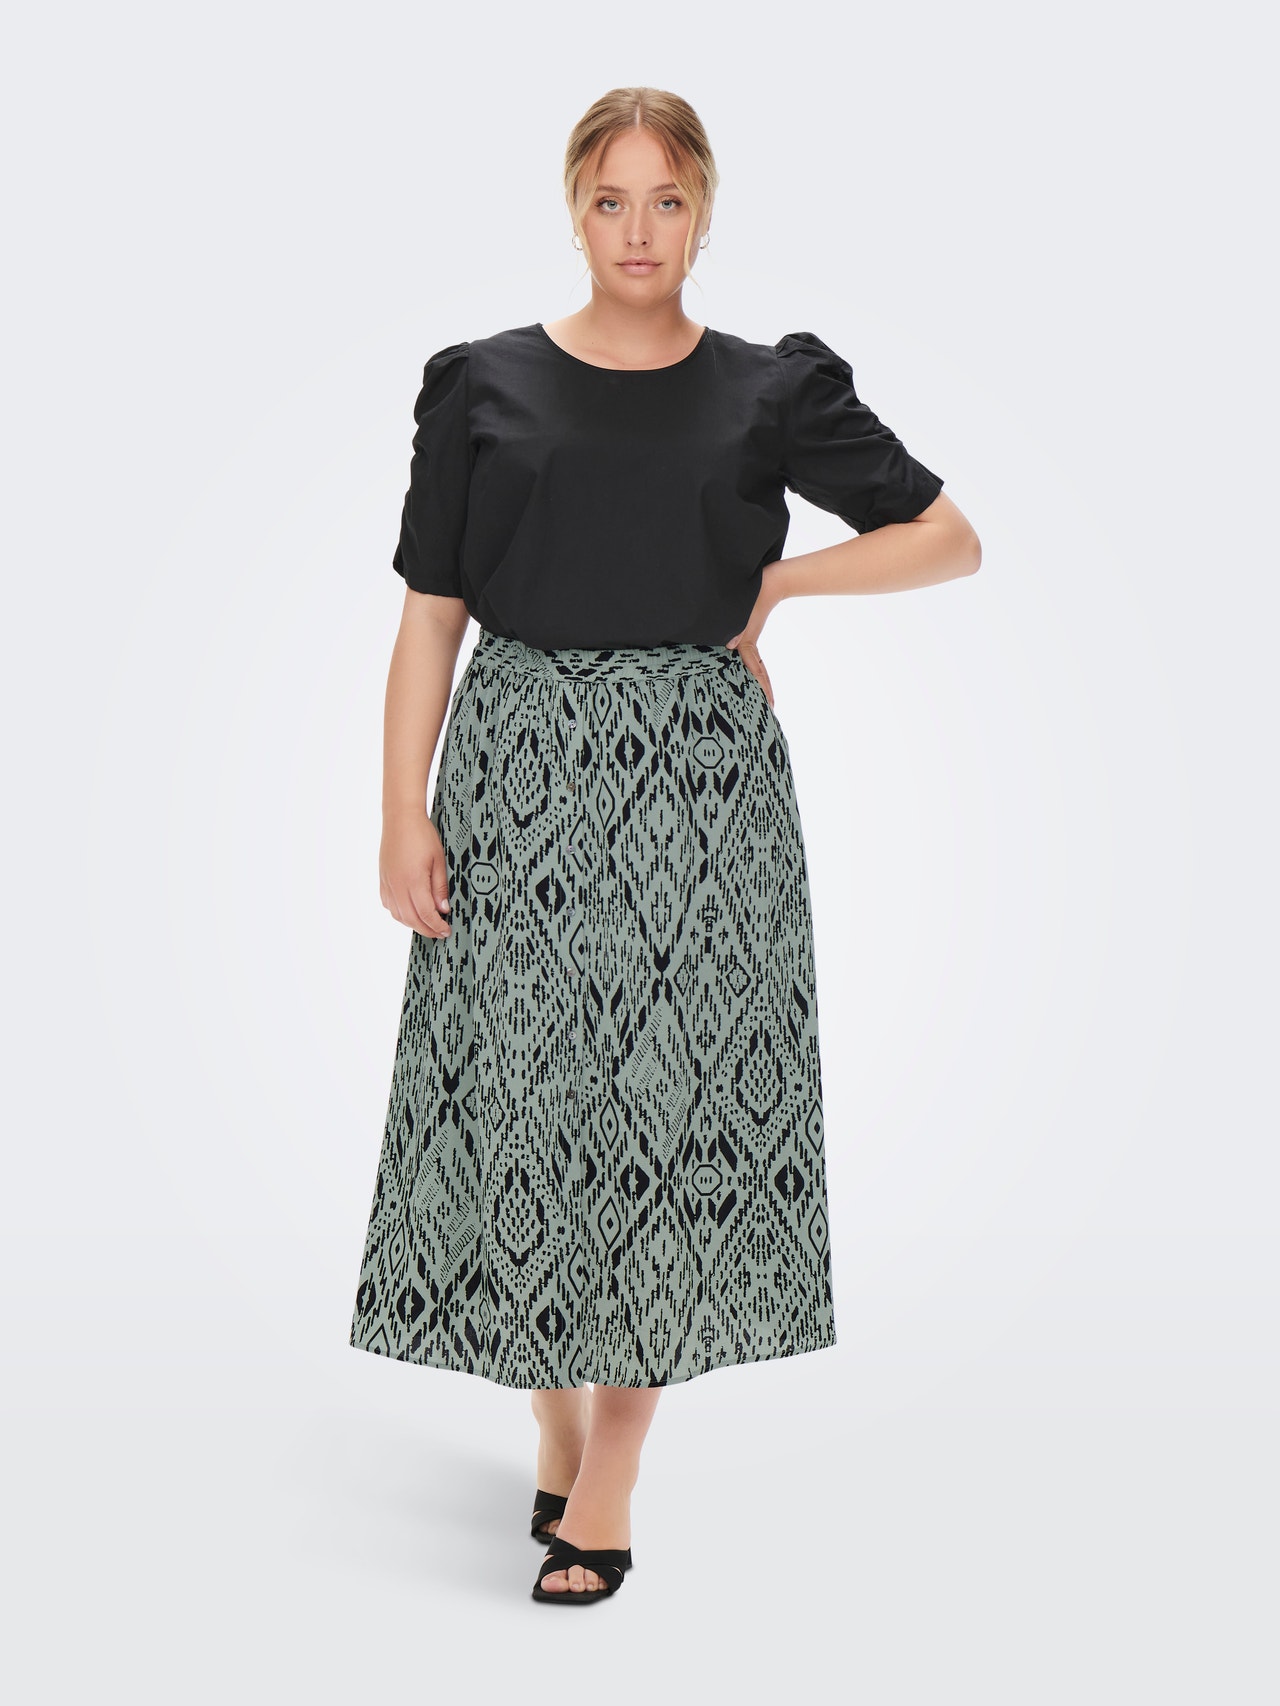 ONLY Curvy midi skirt -Chinois Green - 15251111